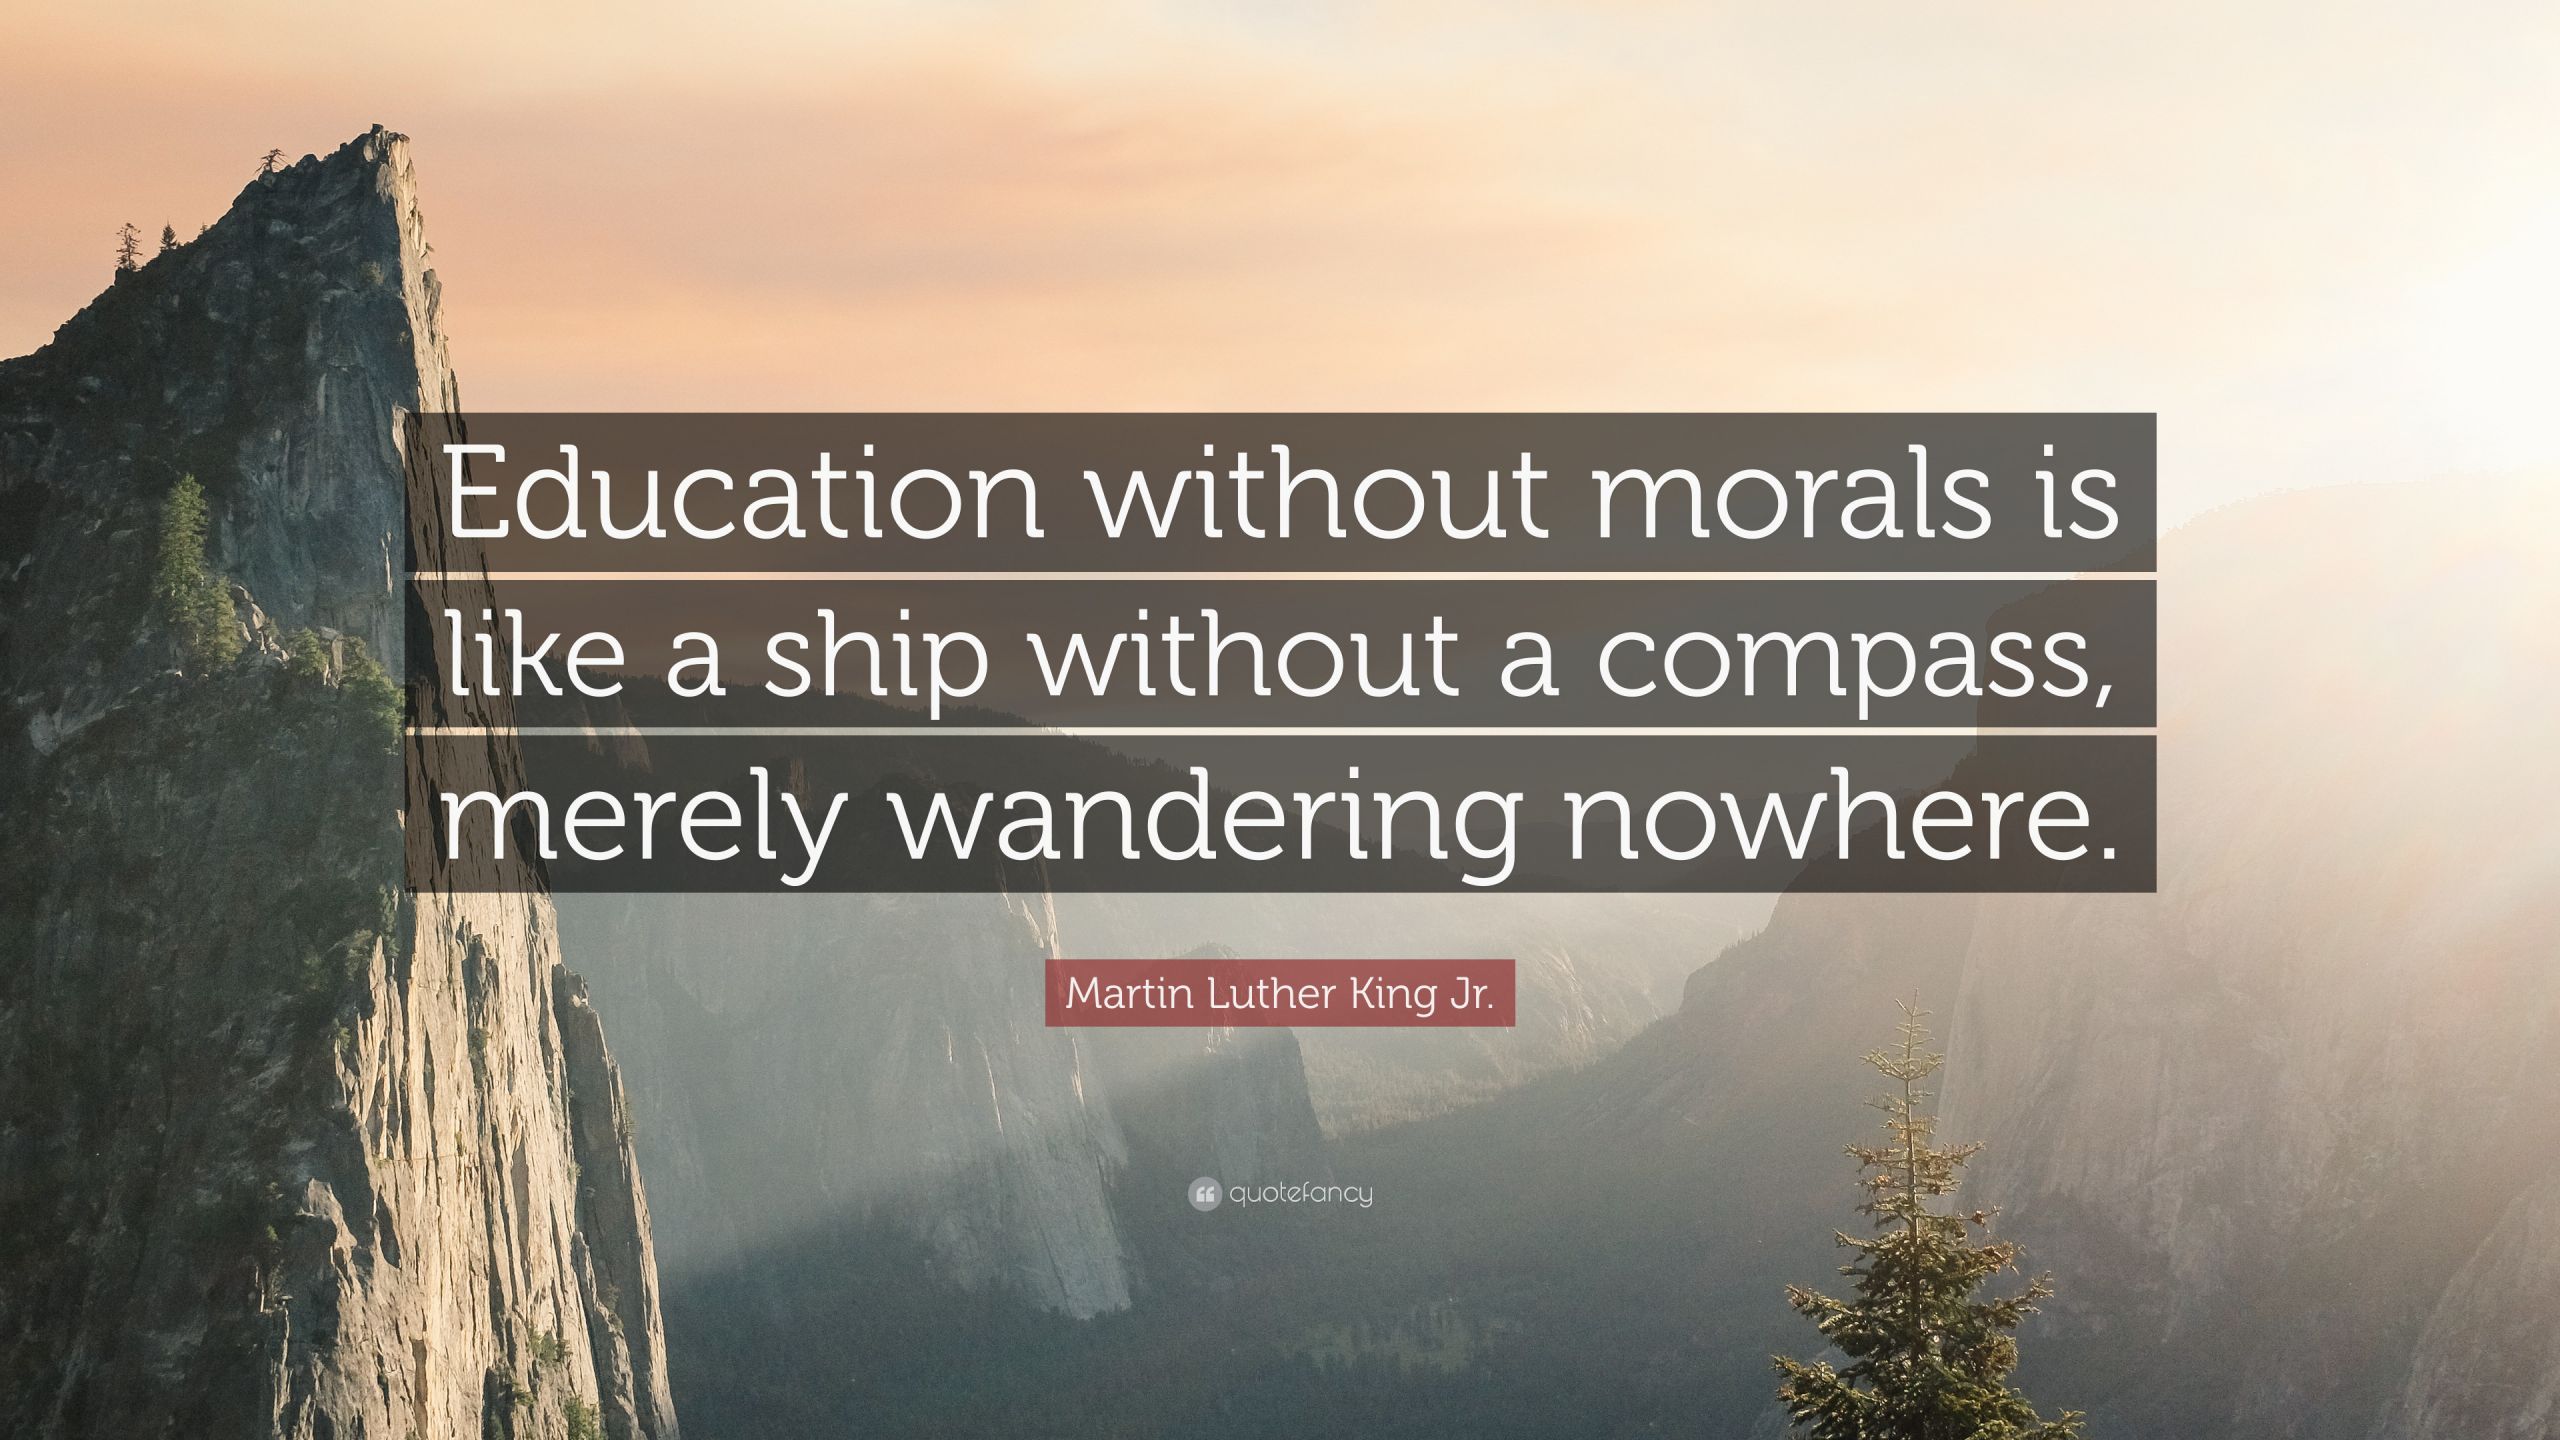 Martin Luther King Jr Quotes Education
 Martin Luther King Jr Quote “Education without morals is